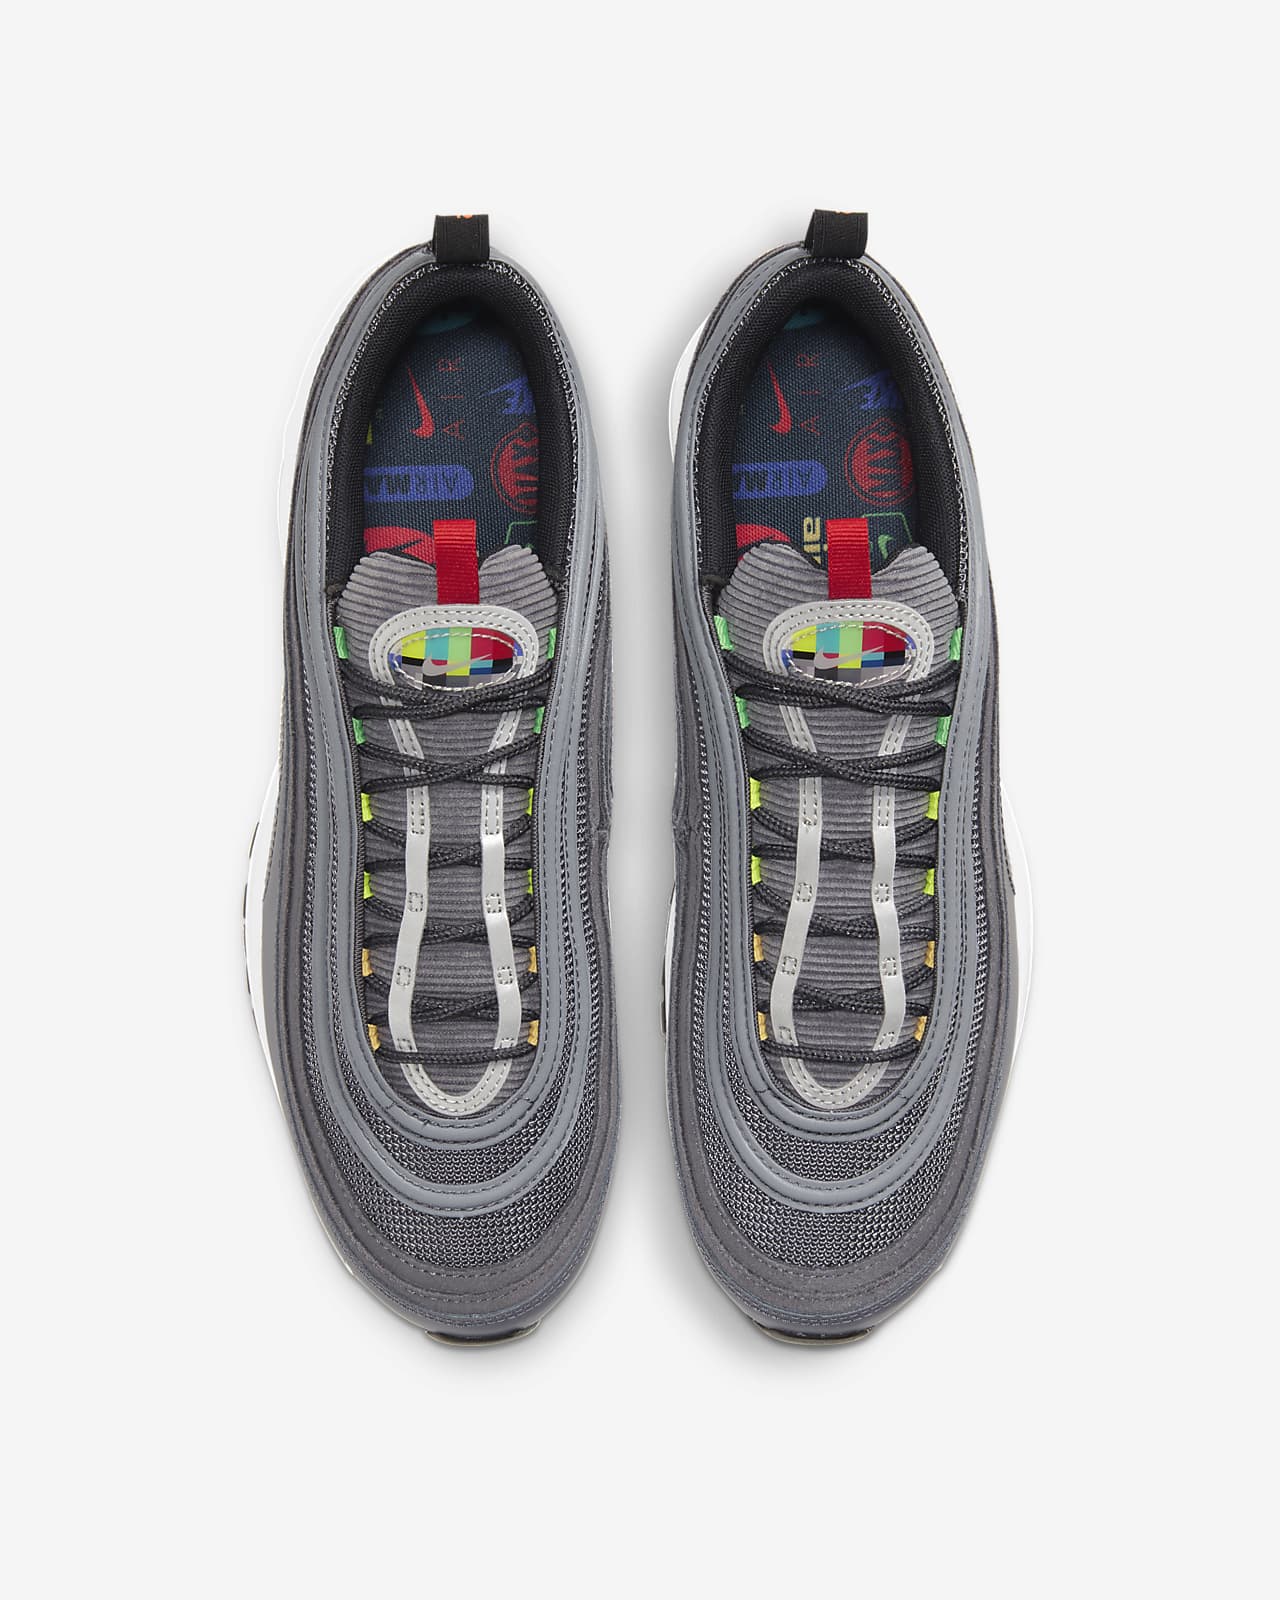 nike air max 97 next day delivery